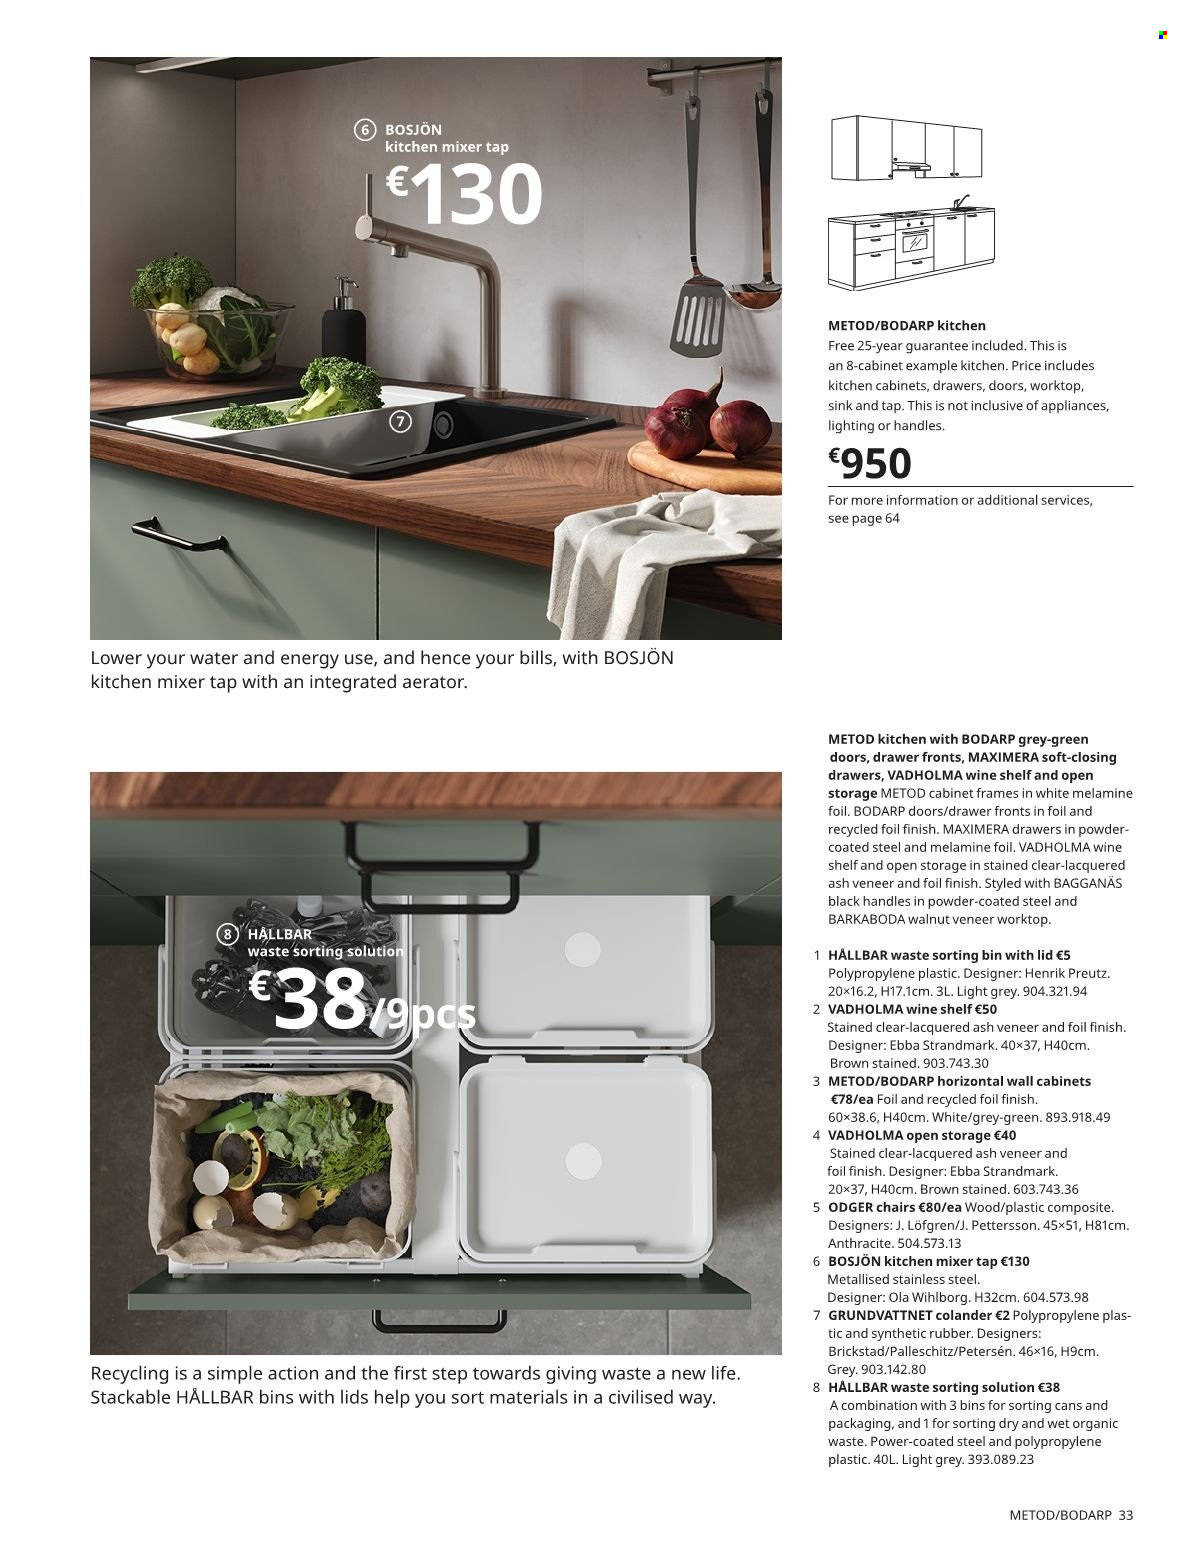 thumbnail - IKEA offer  - Sales products - cabinet, Metod, kitchen cabinet, chair, drawer fronts, wine shelf, sink, kitchen mixer, colander, mixer tap, bin. Page 33.